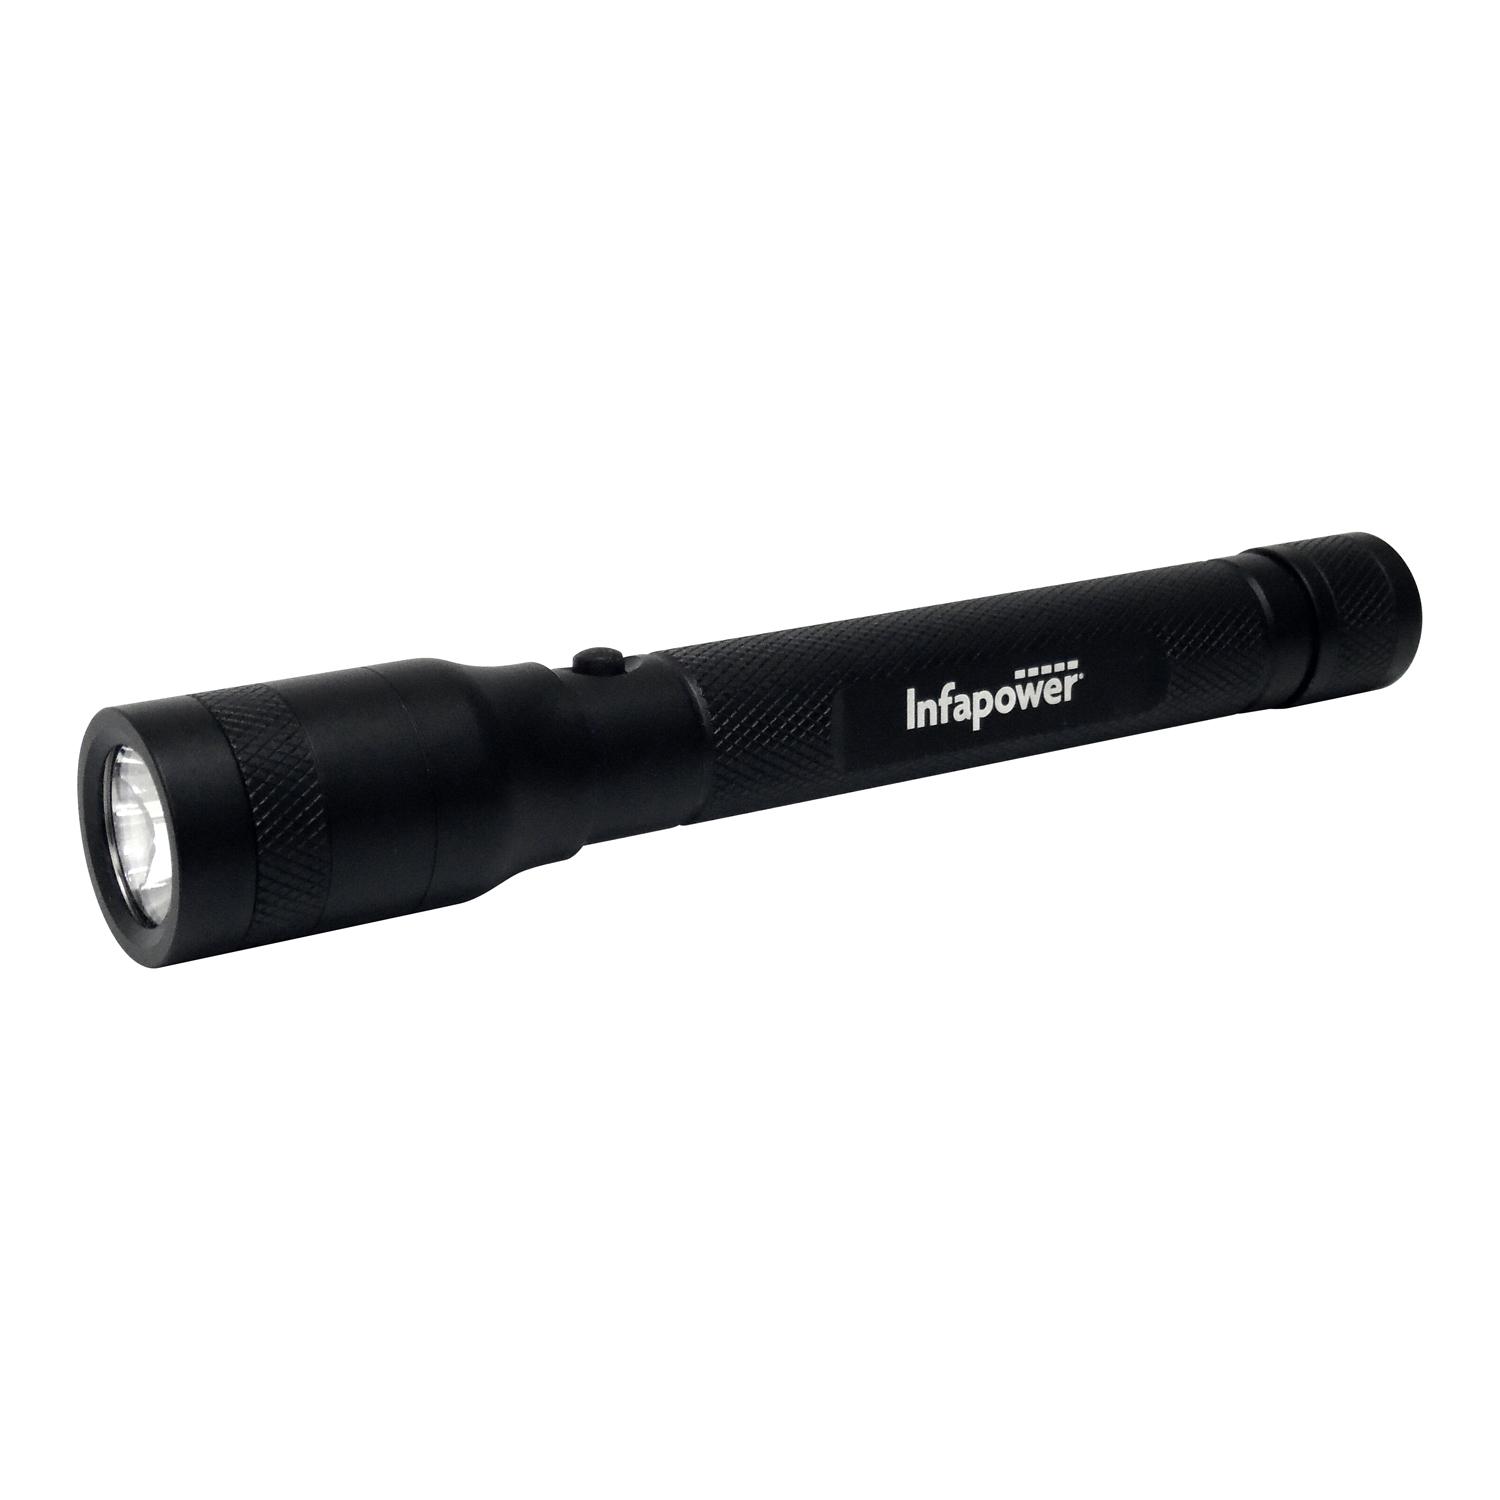 Infapower Aluminium Rechargeable Torch F051